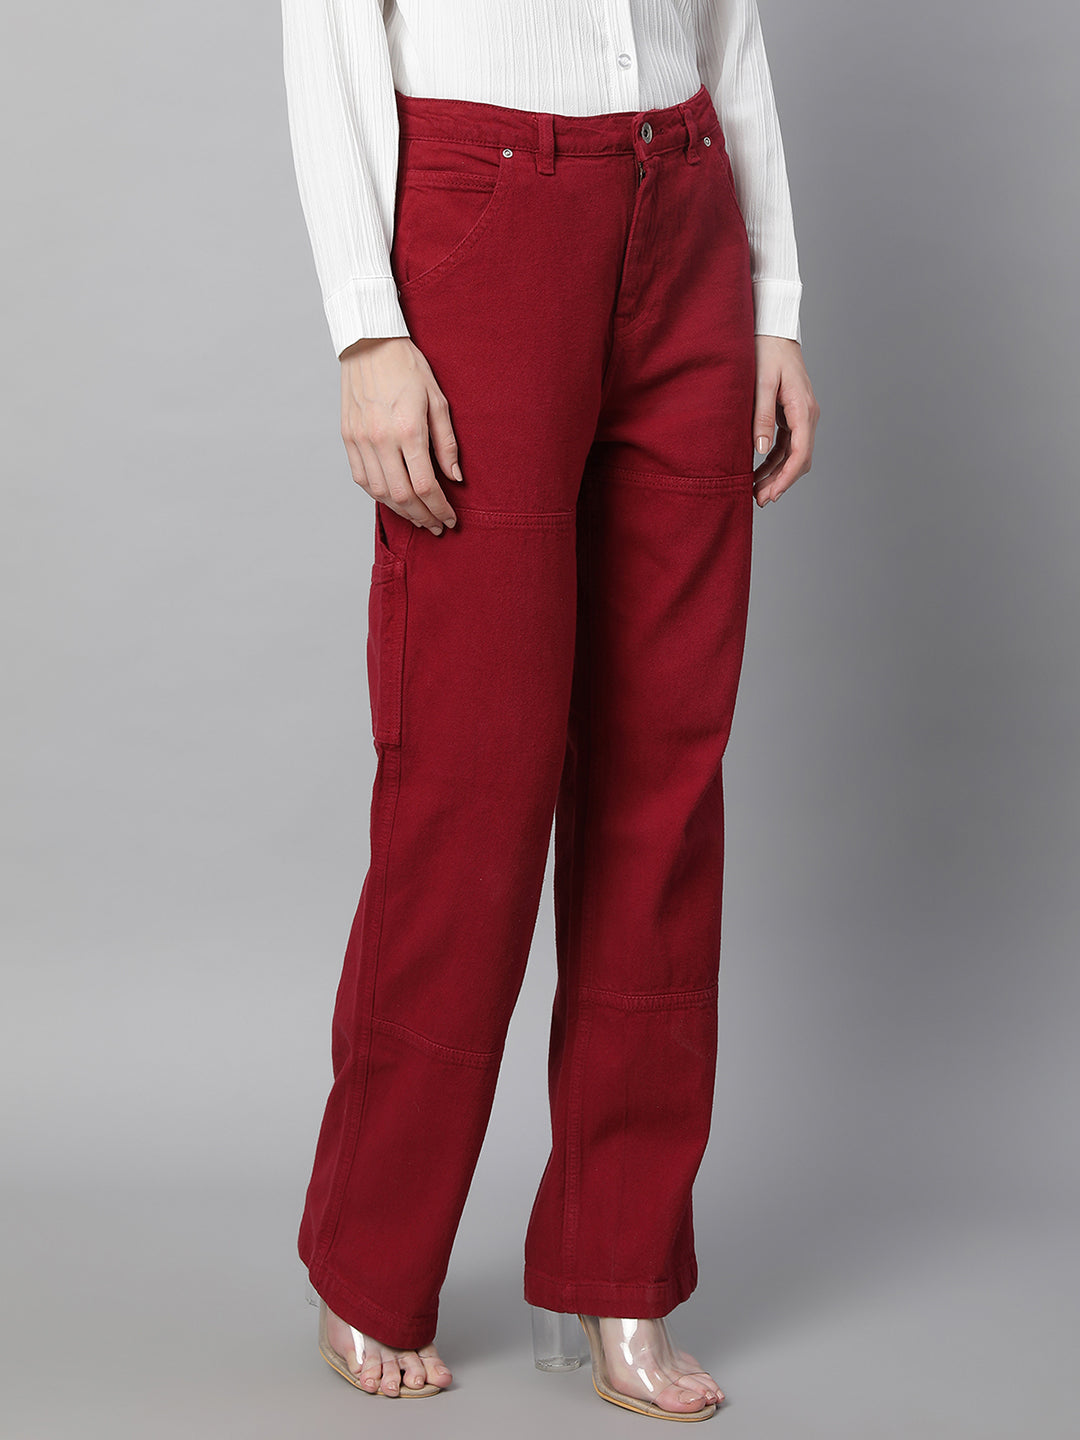 Women Straight Fit Full Length Red Jeans